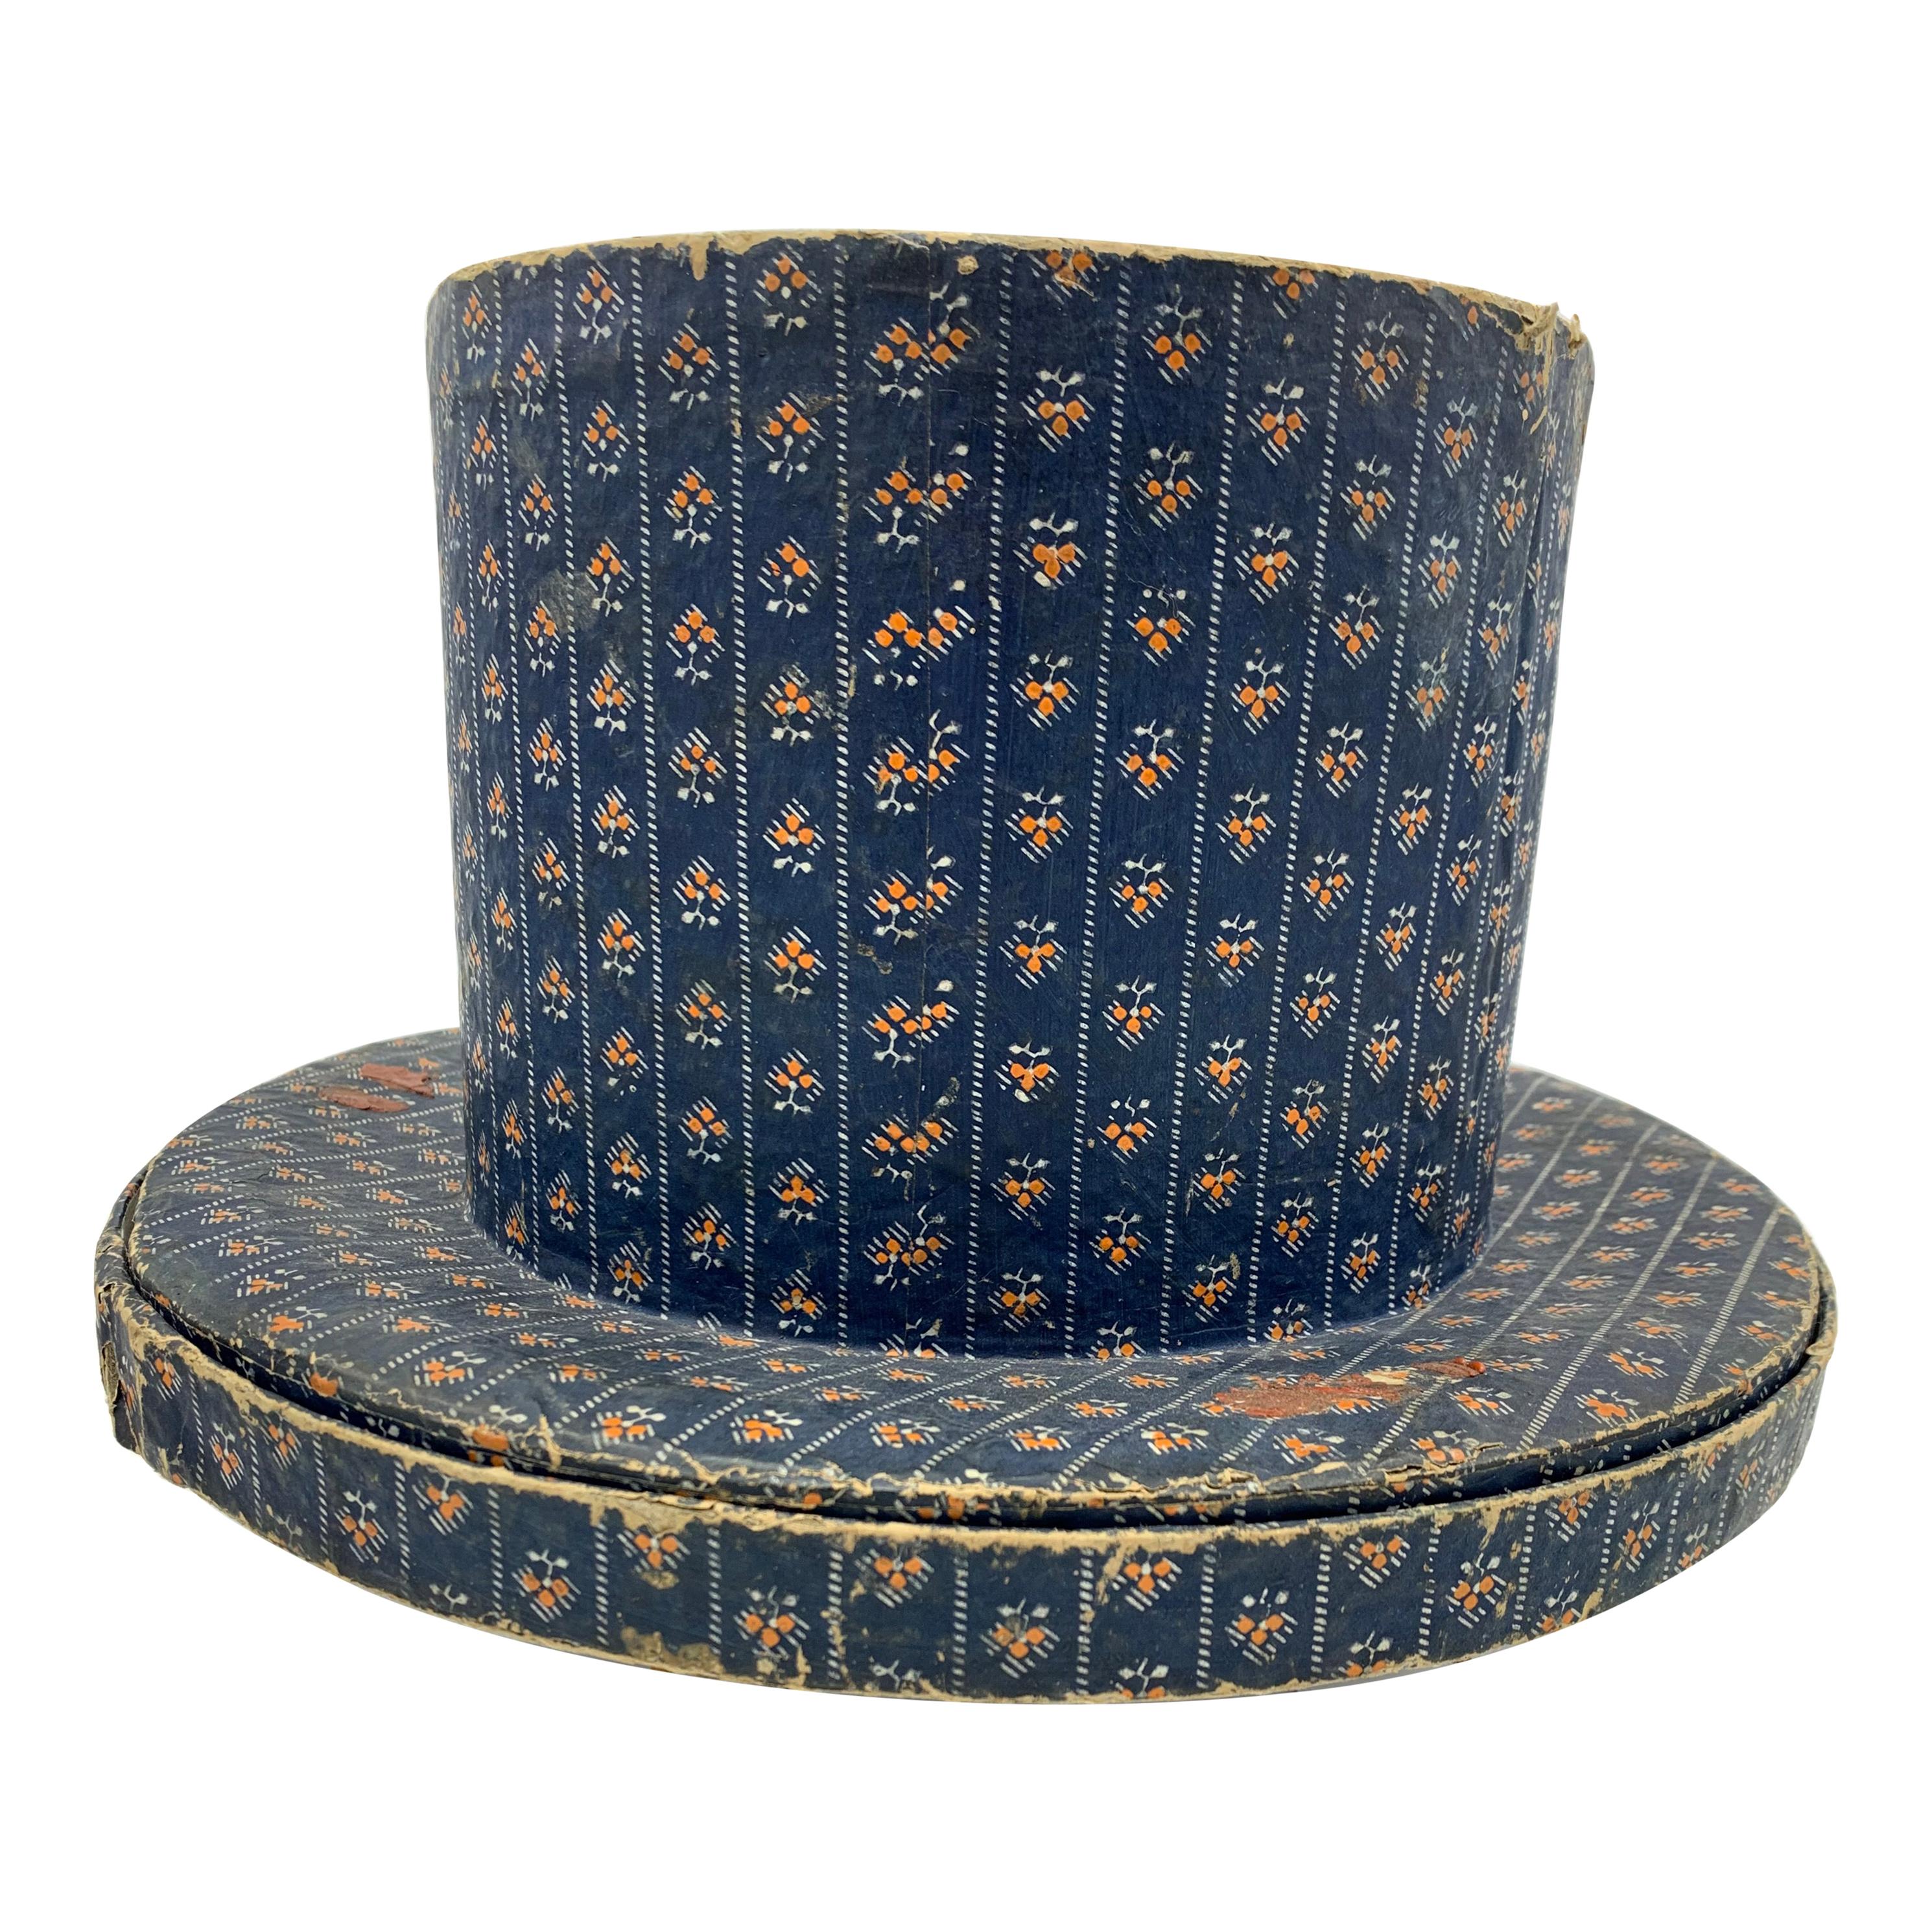 Mid-19th Century French Oval Pigskin Leather Top Hat Box from Paris -  Country French Interiors